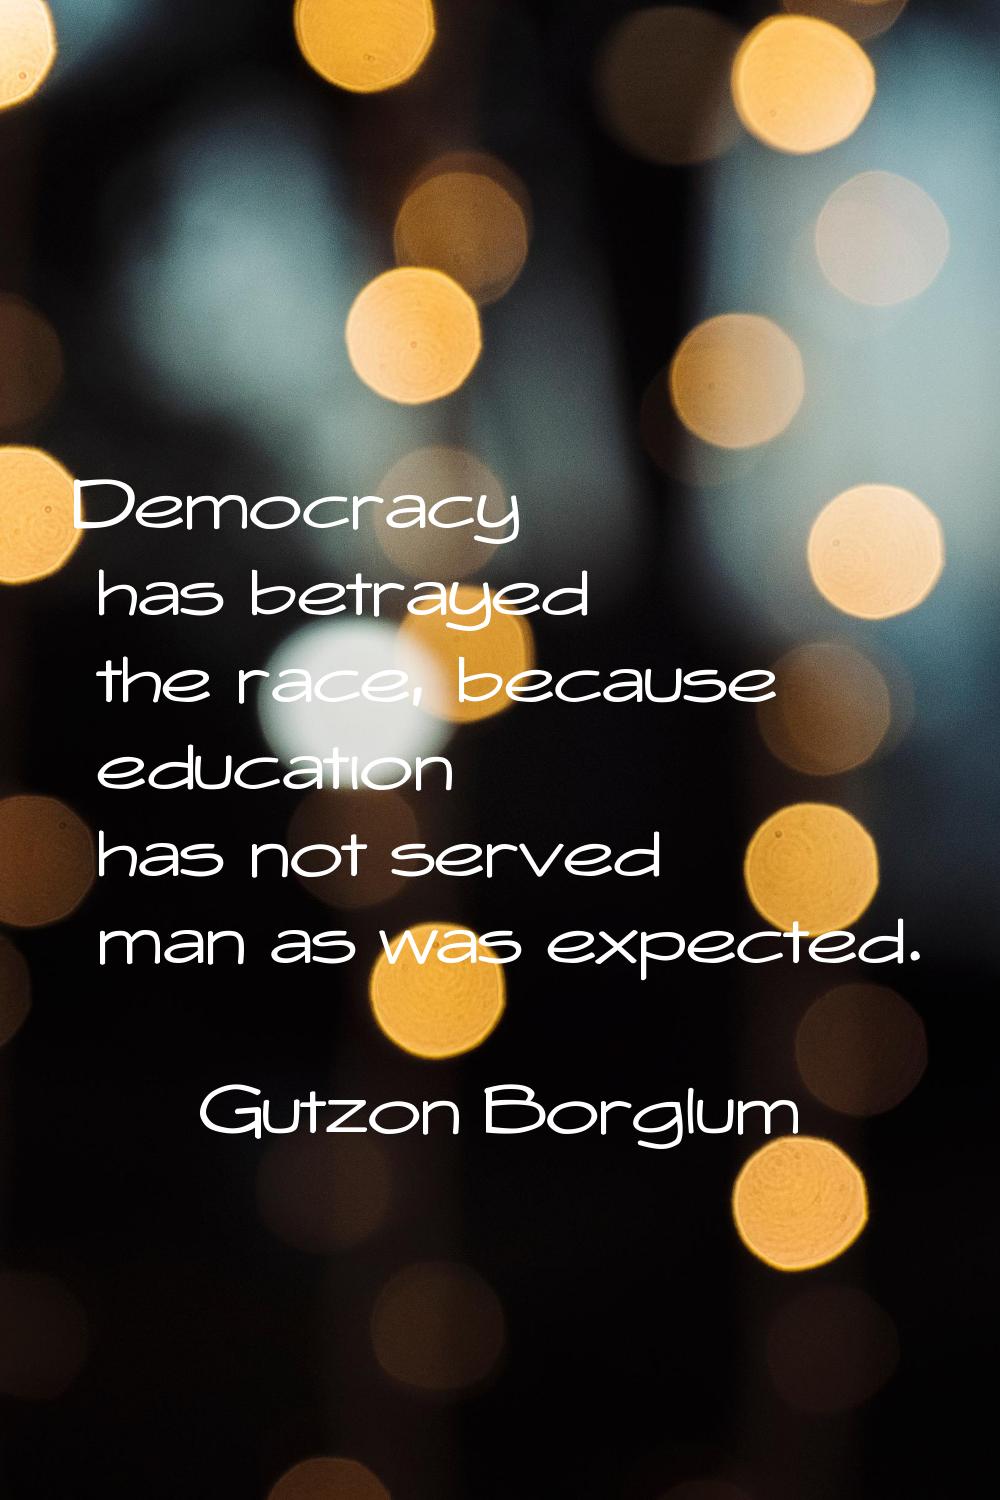 Democracy has betrayed the race, because education has not served man as was expected.